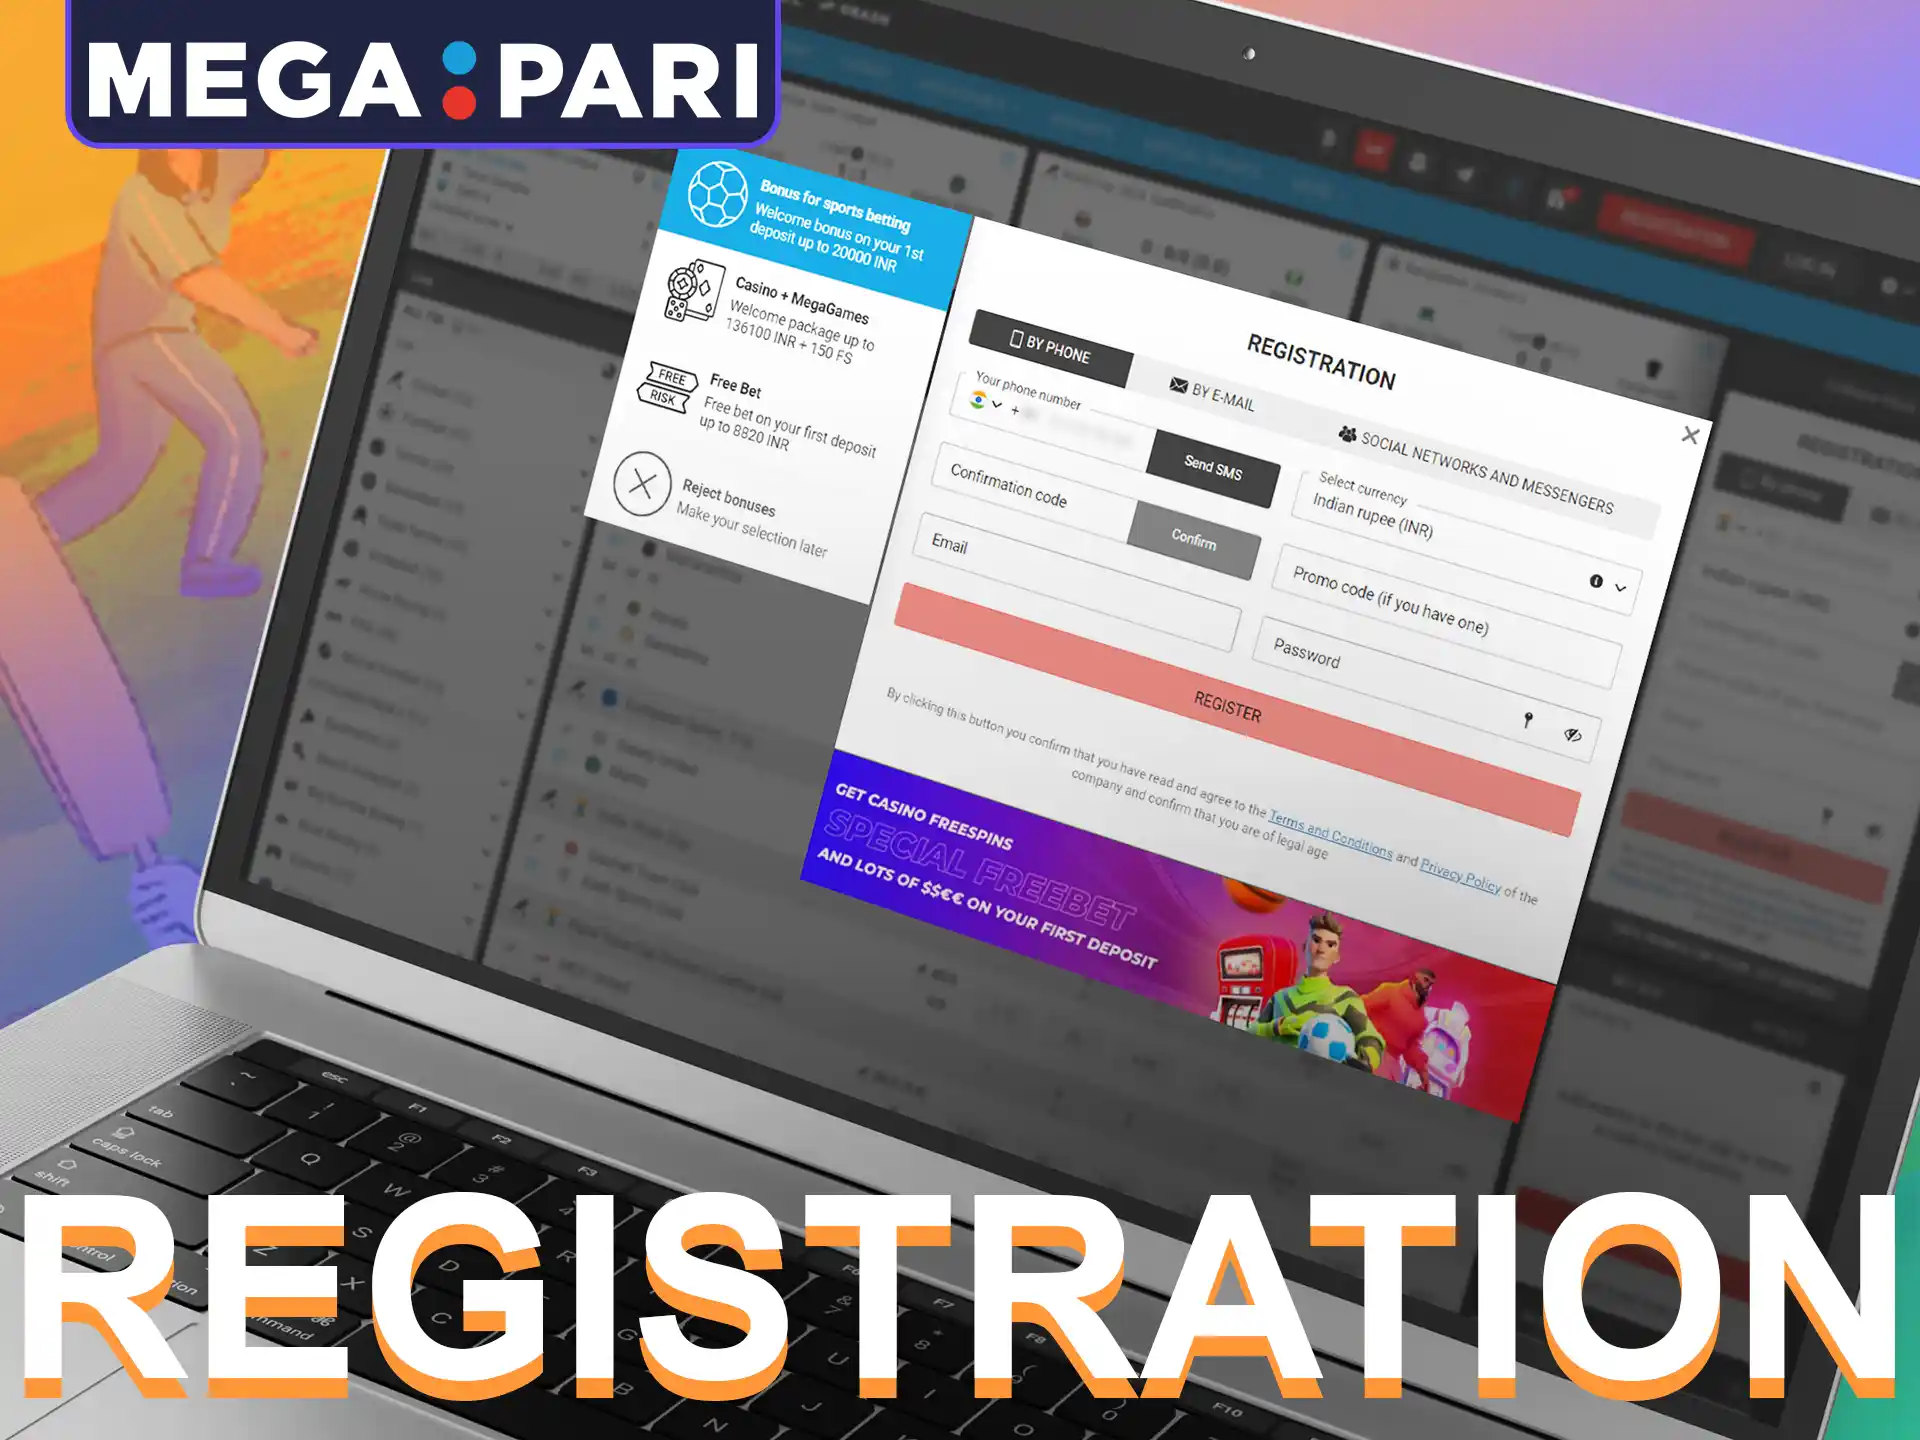 Go to the official Megapari website and register your account to start playing.